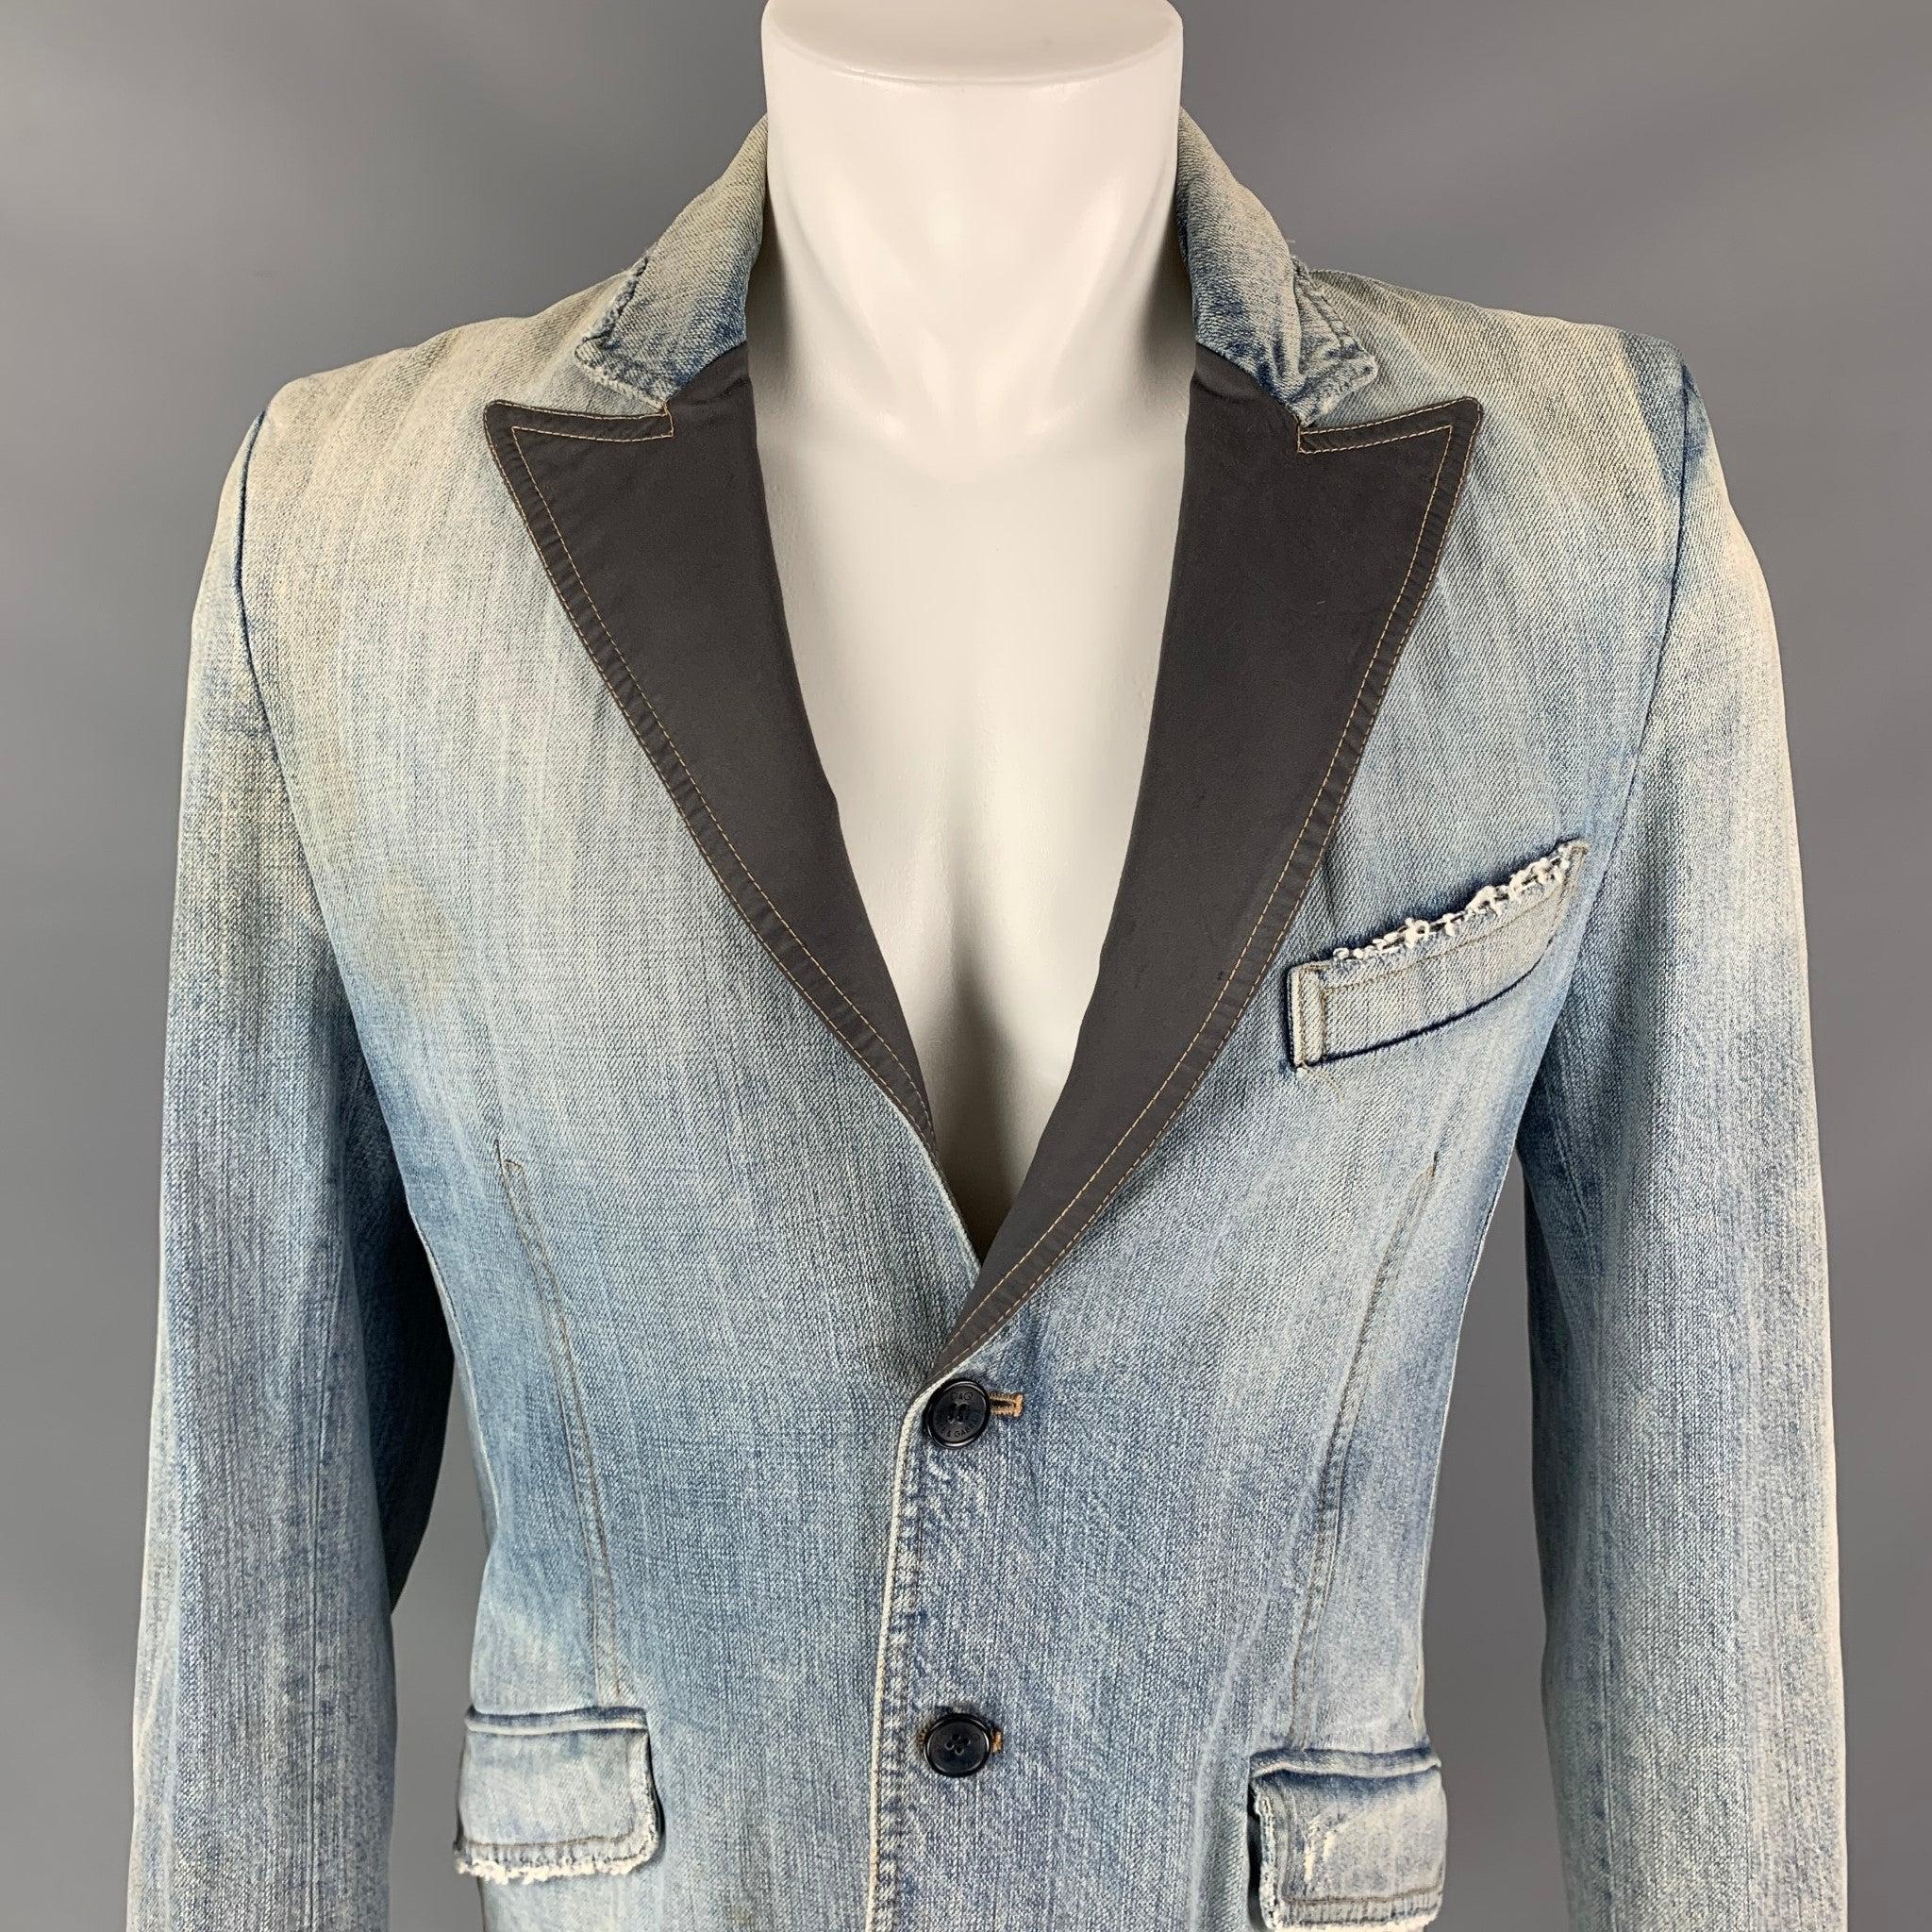 D&G by DOLCE & GABBANA jacket comes in a blue distressed denim with a full liner featuring a gray peak lapel, single back vent, flap pockets, and a two button closure. Made in Italy.
Good
Pre-Owned Condition. 

Marked:   36/50 

Measurements: 
